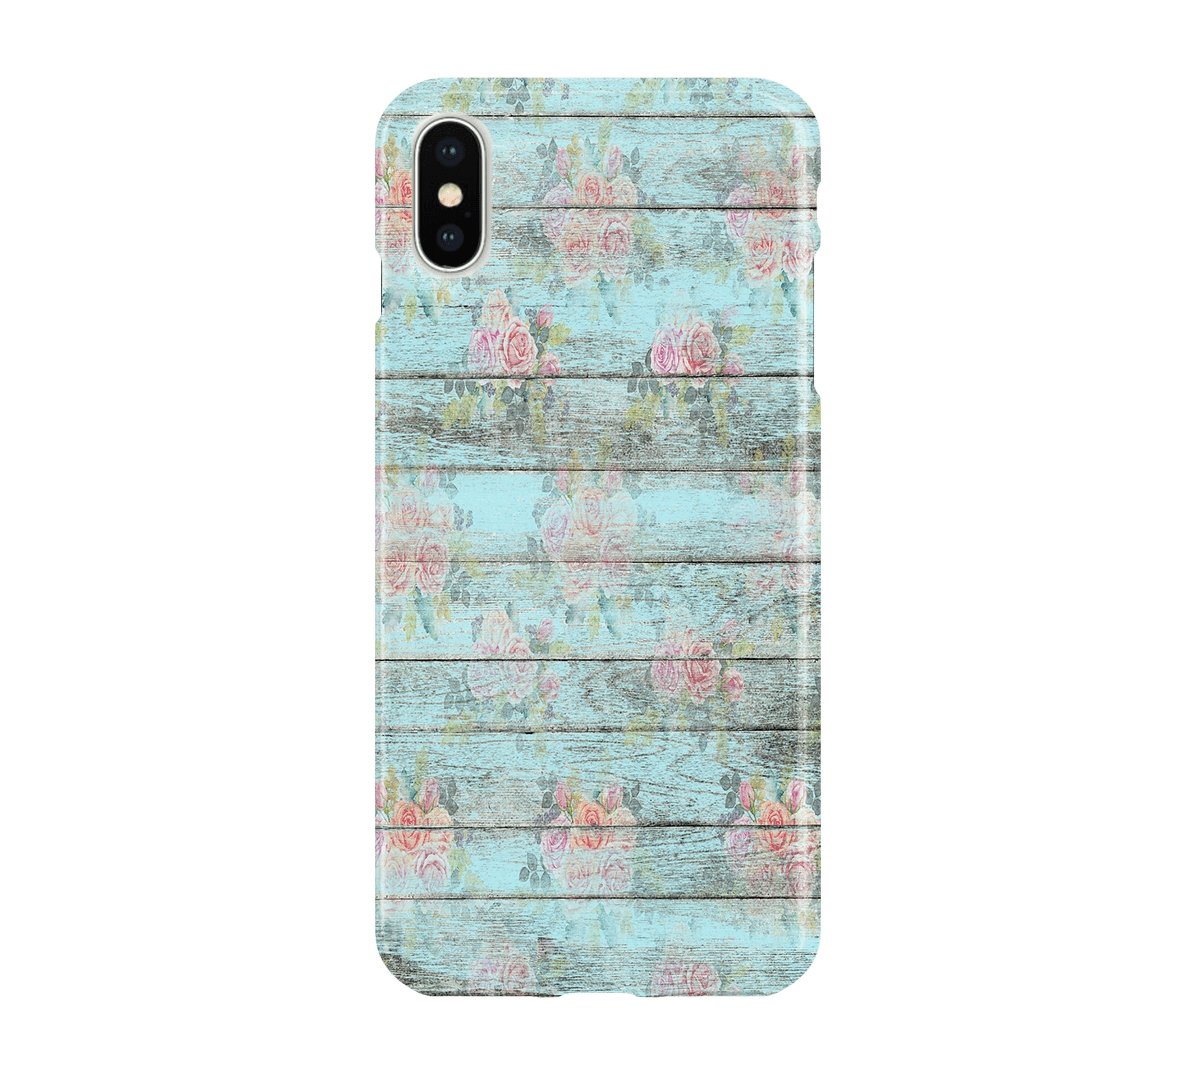 Shabby Chic Wood - iPhone phone case designs by CaseSwagger